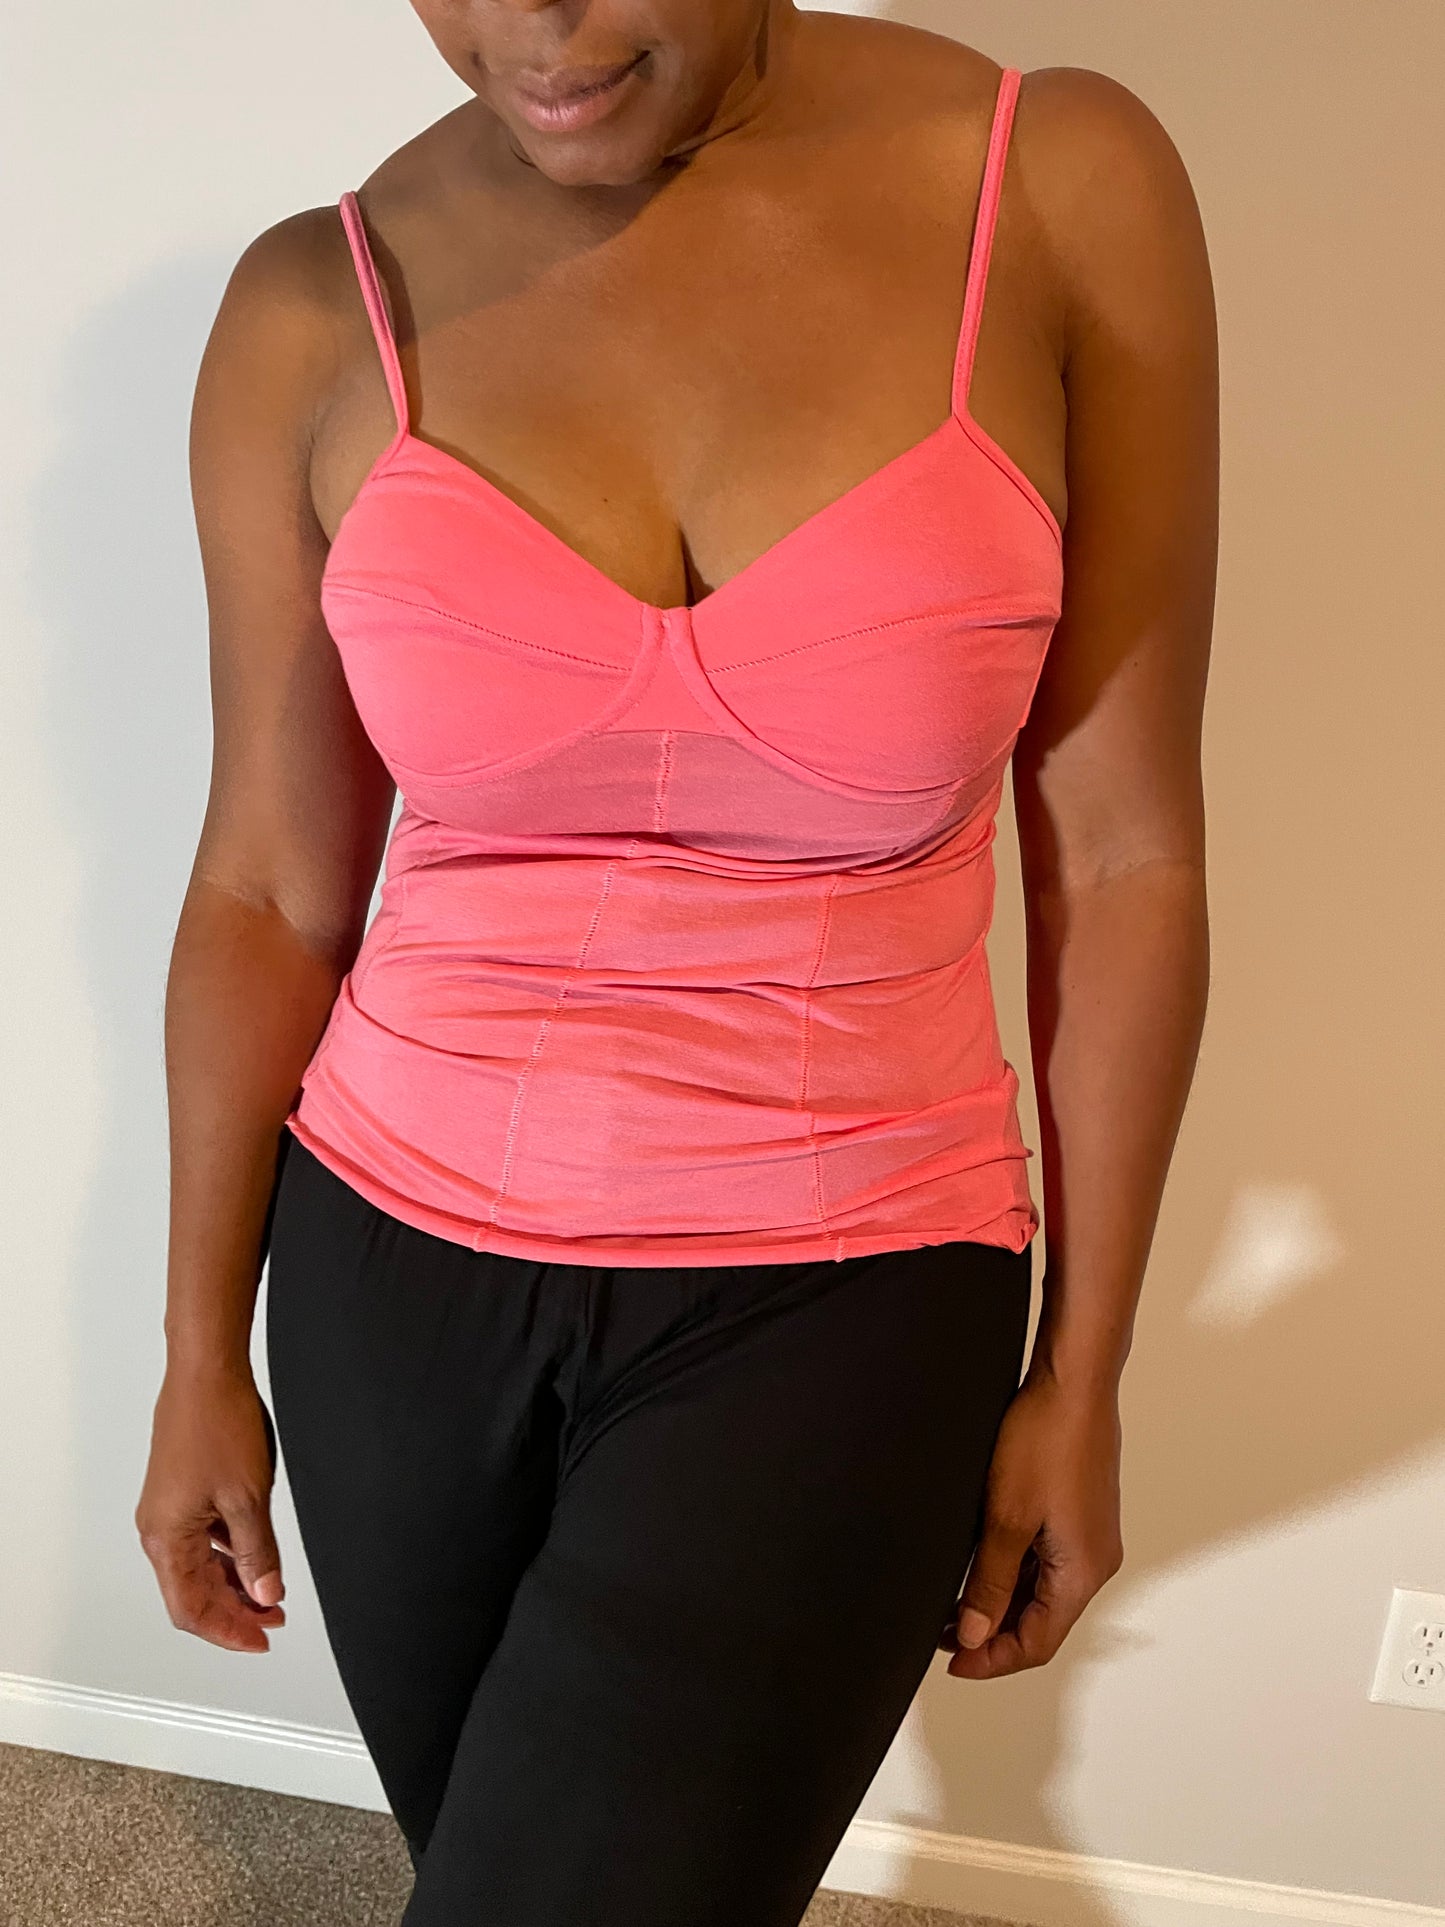 CAMISOLE YOGA TOP WITH ADJUSTABLE SPAGHETTI STRAPS